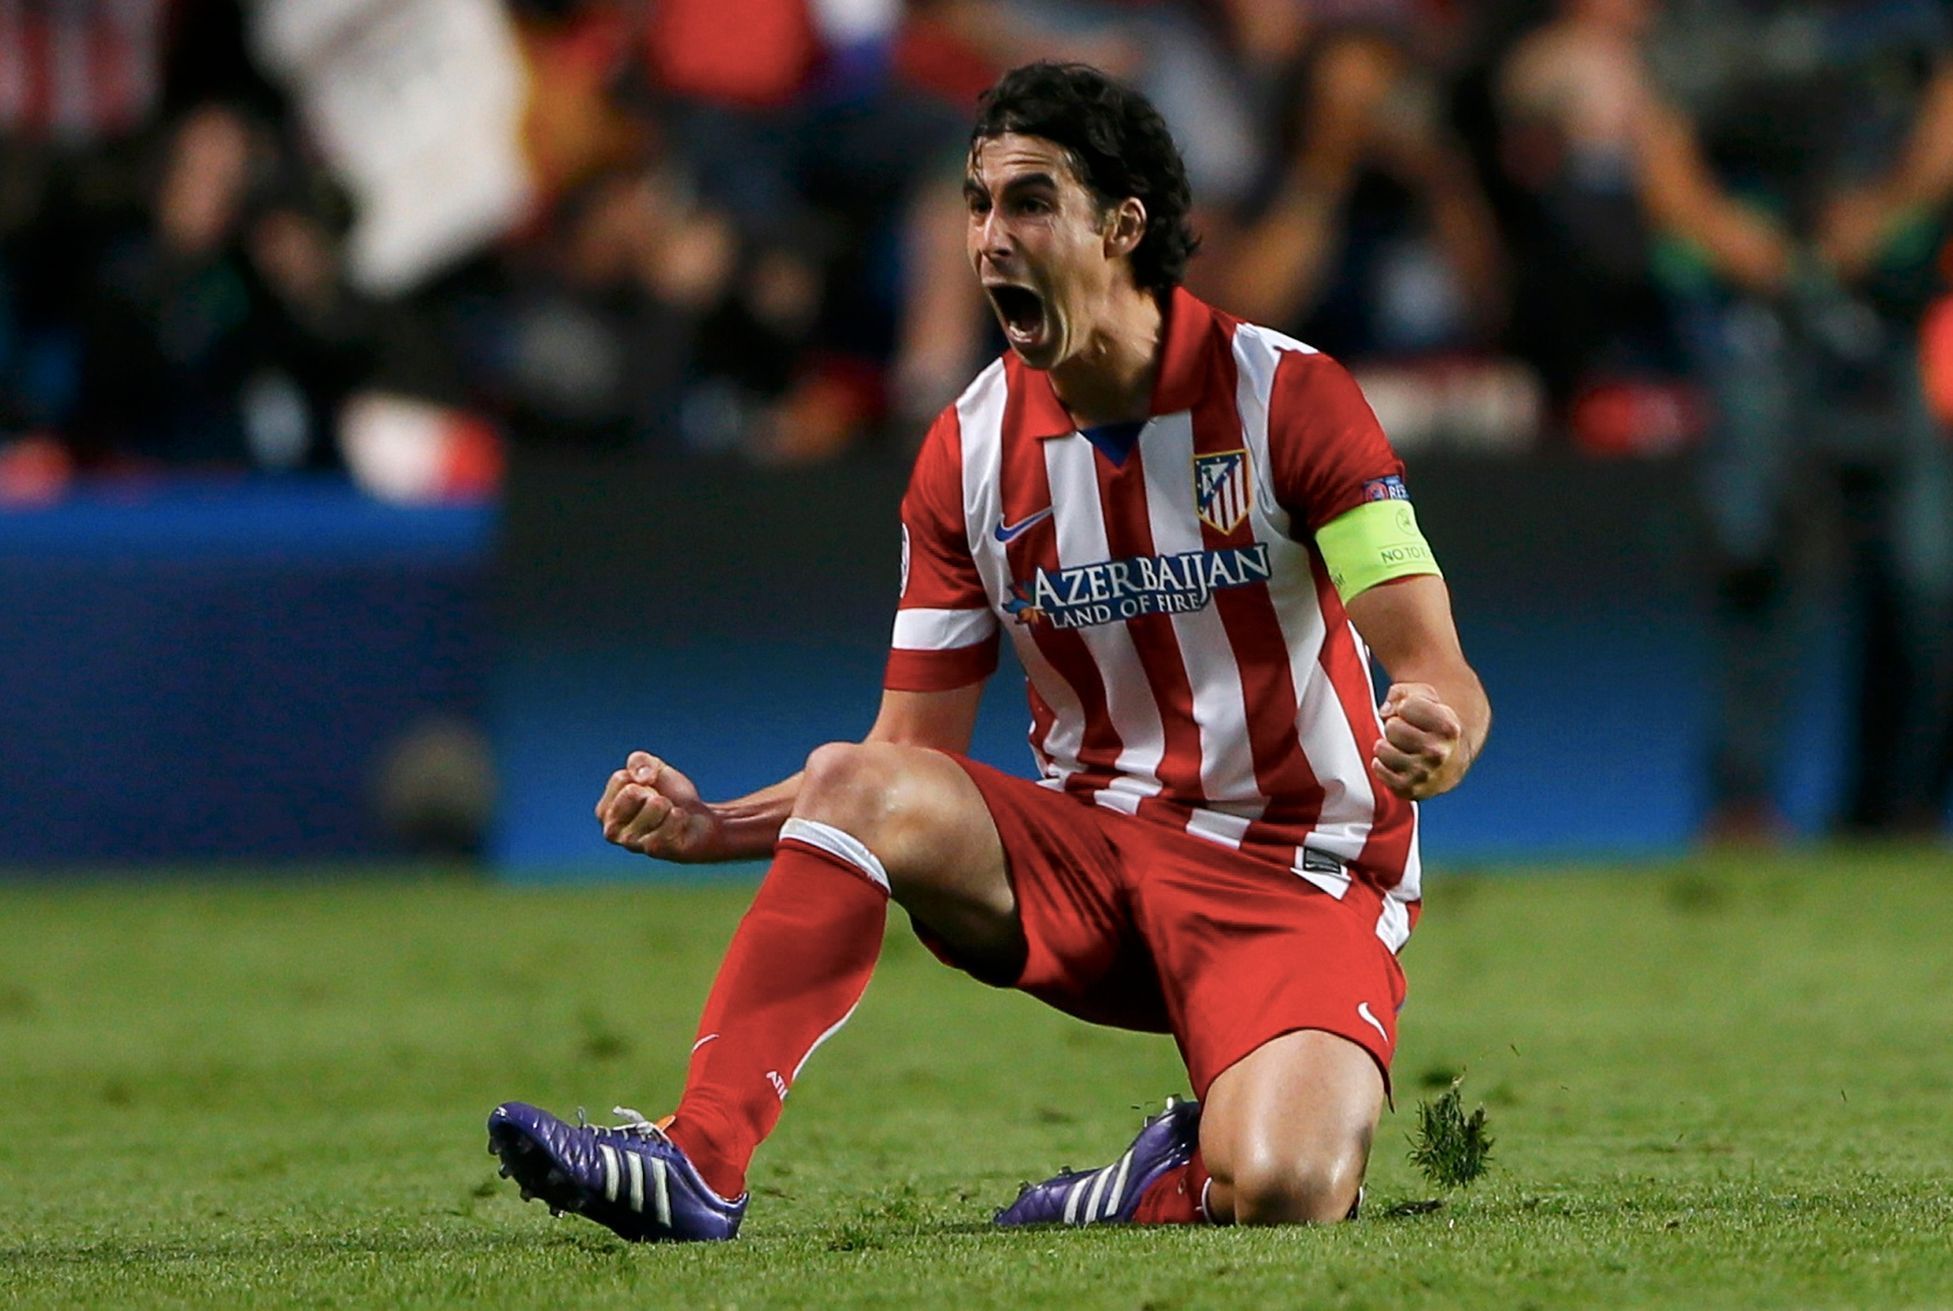 Atletico Madrid's Tiago celebrates the goal of team mate Lopez against Chelsea during their Champions League semi-final second leg soccer match at Stamford Bridge stadium in London